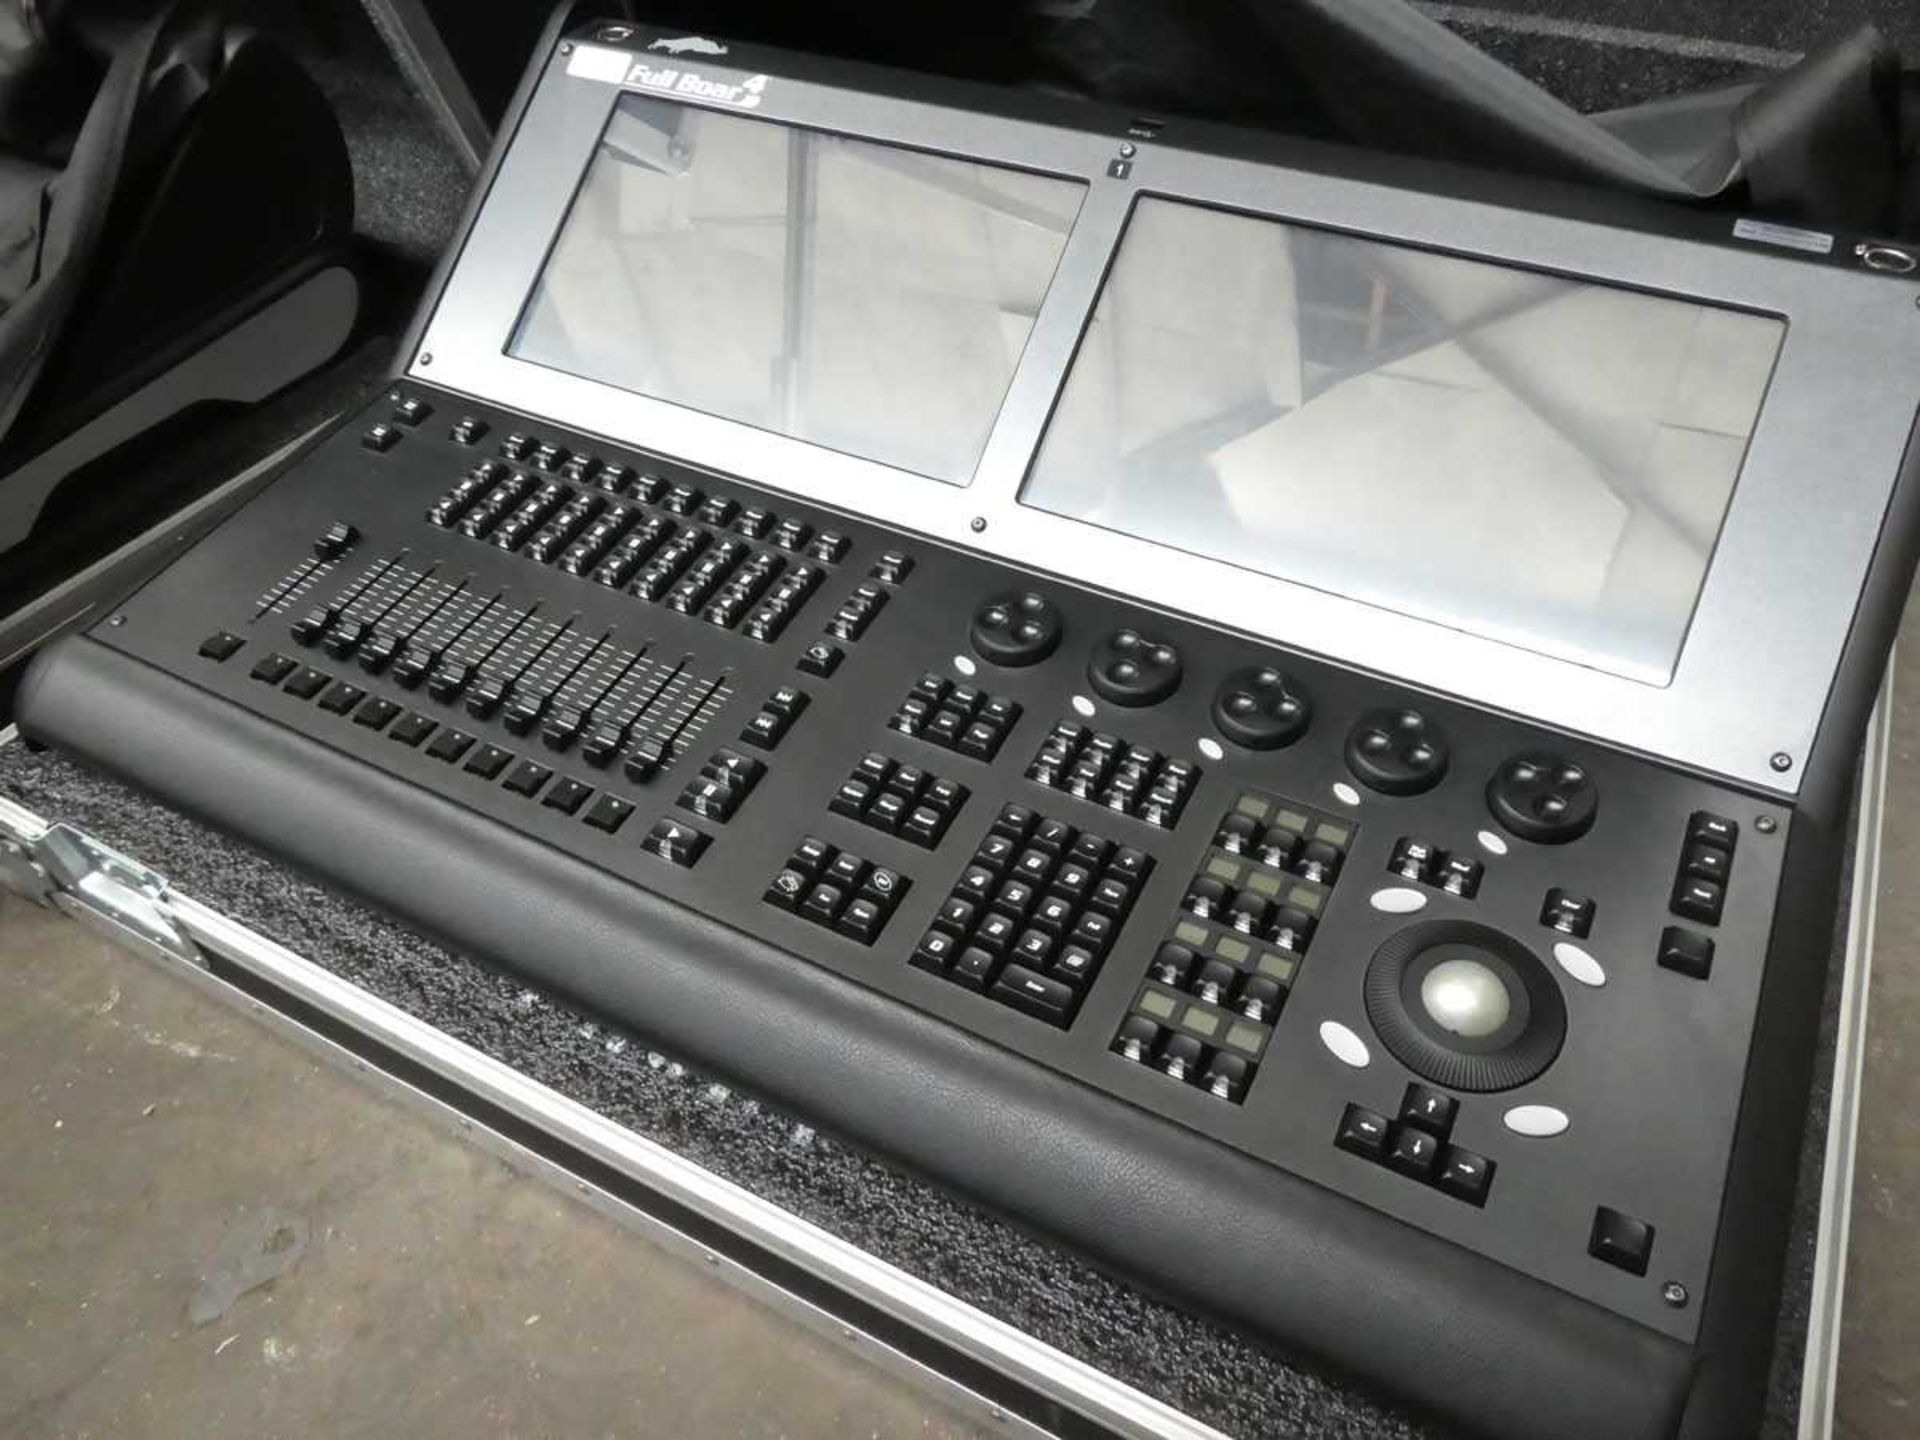 +VAT Hog Full Boar 4 DMX lighting console by High End Systems with 4x DMX outputs on rear panel, - Image 3 of 7